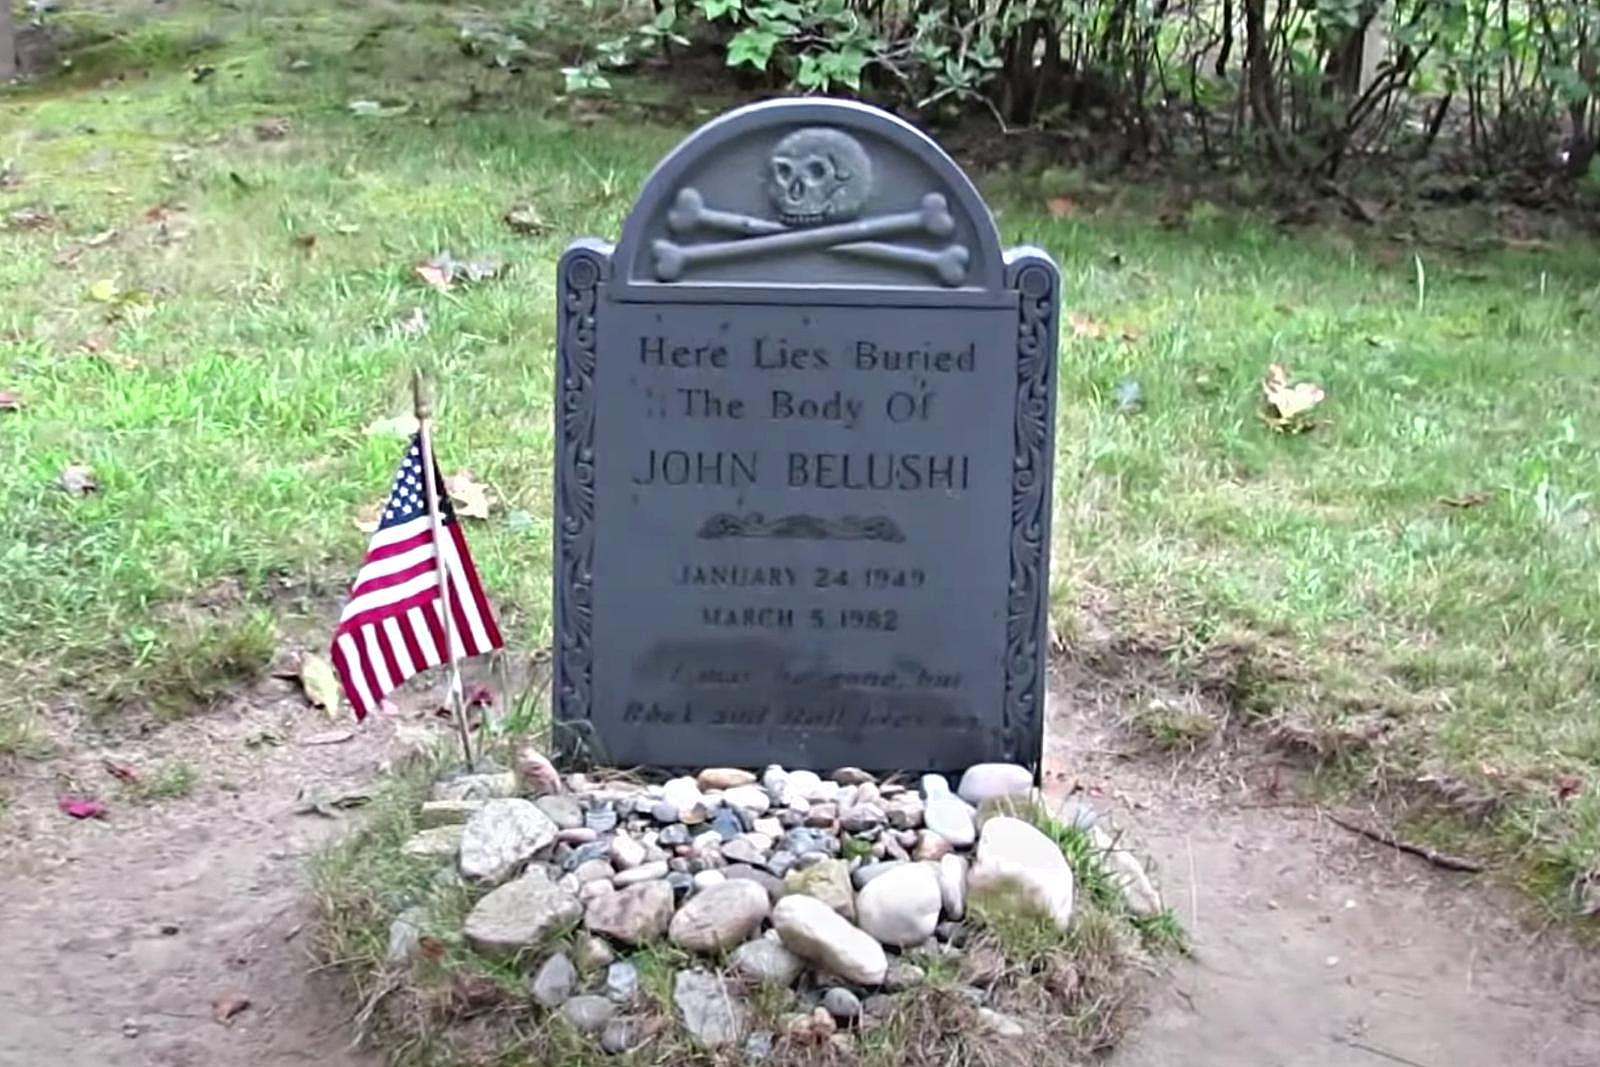 "I May Be Gone But Rock And Roll Lives On," Says John Belushi's Tombstone